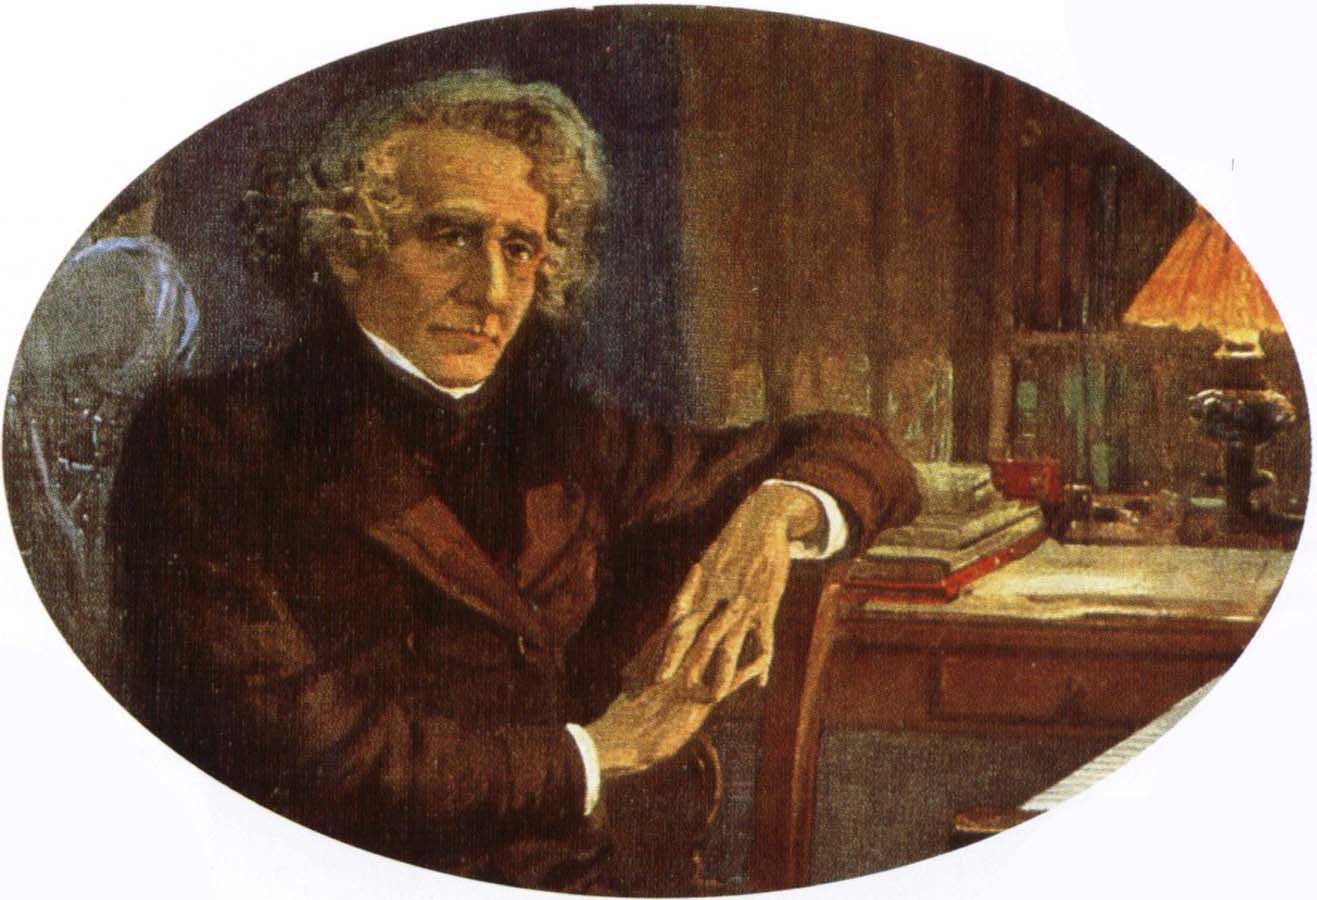 hector berlioz composing his opera les troyens